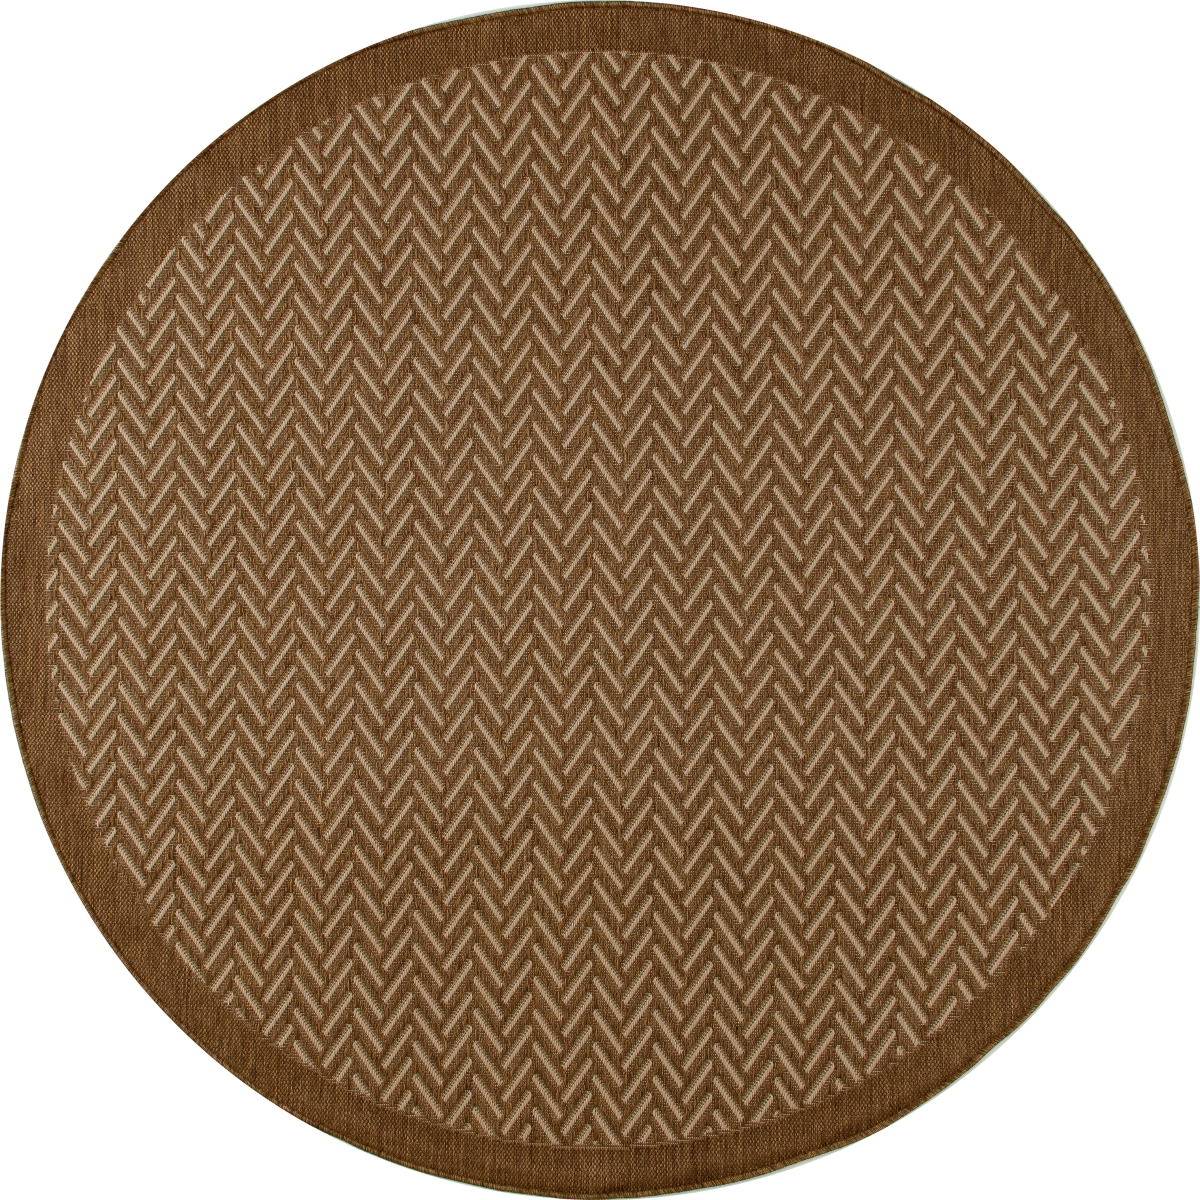 30386 7 Ft. Plymouth Collection Bayou Flat Woven Indoor & Outdoor Round Area Rug, Brown